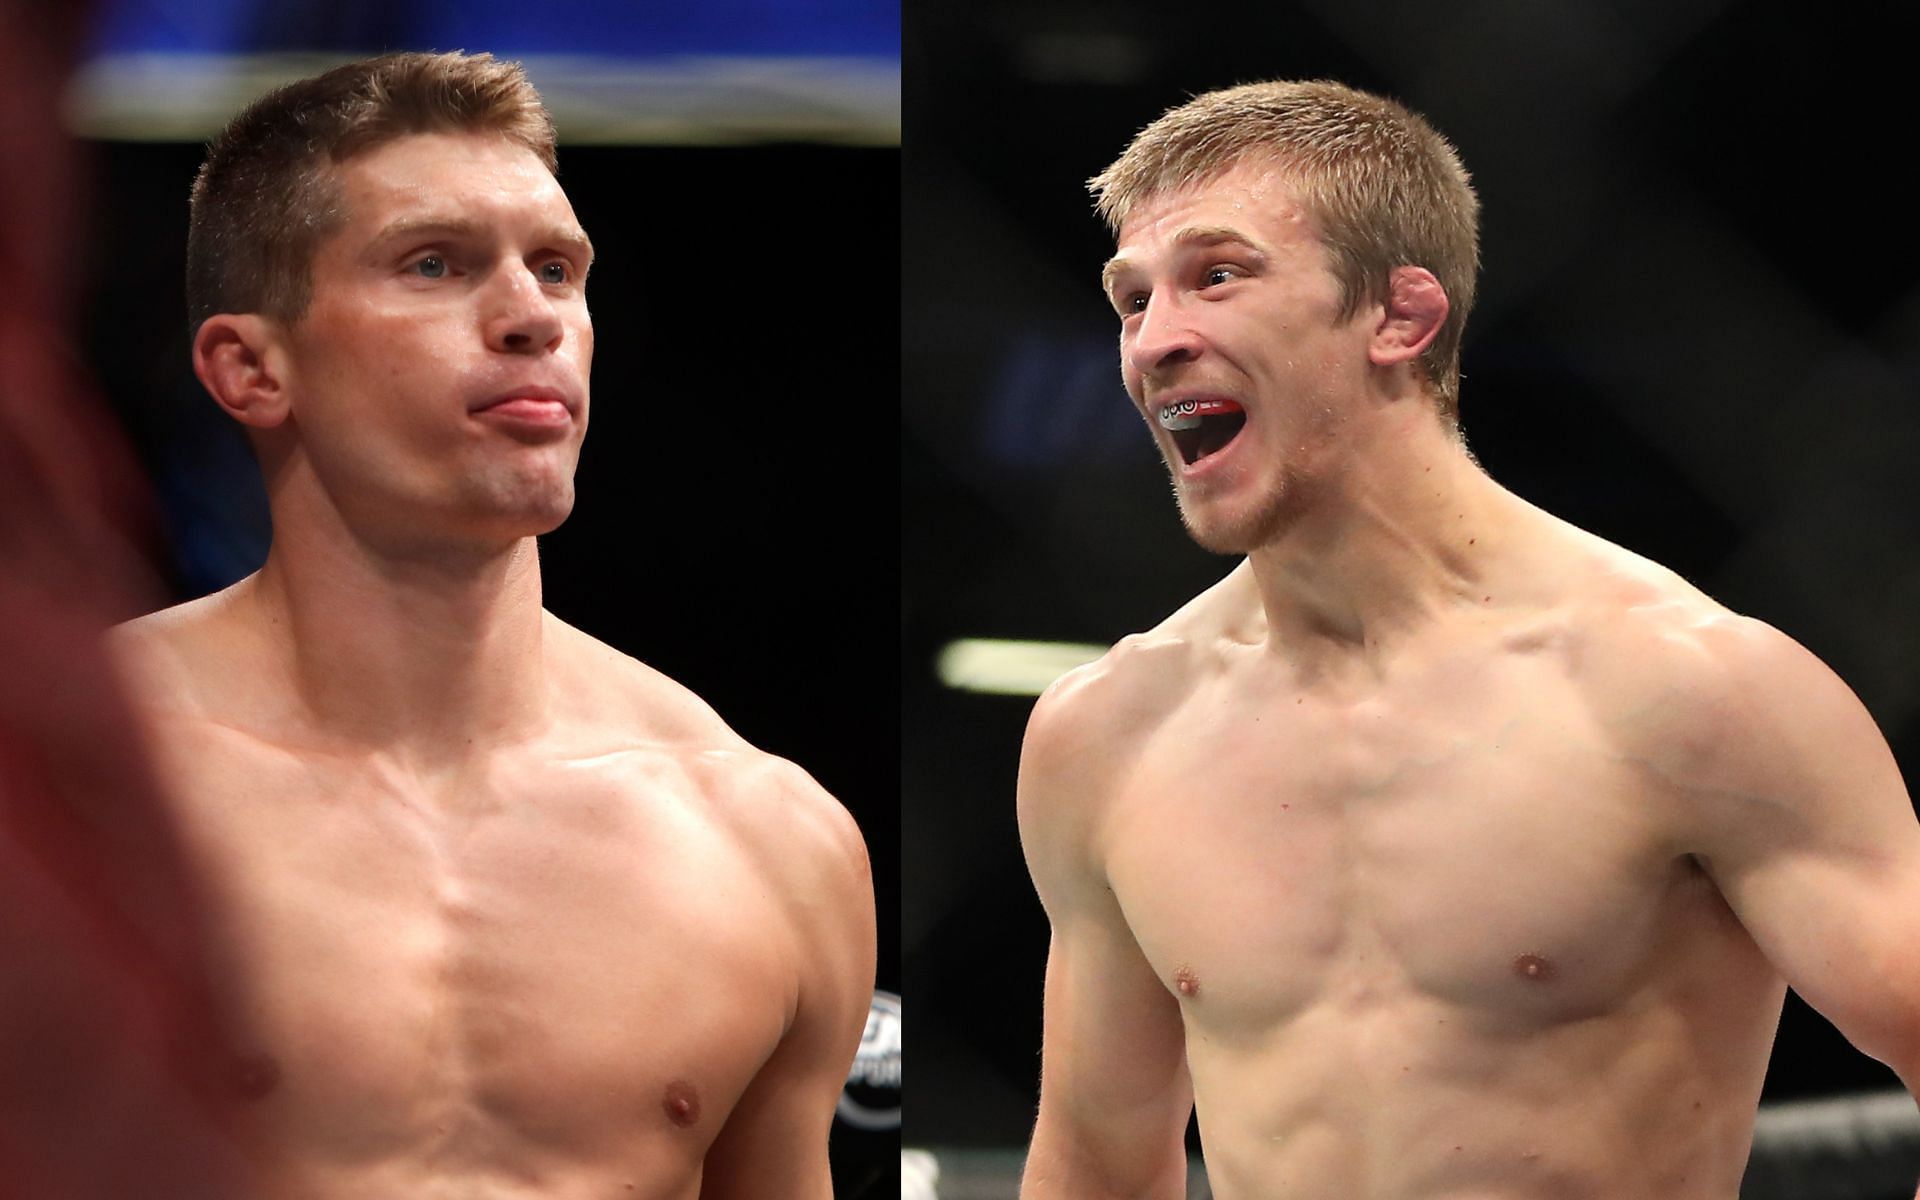 Stephen Thompson (left) and Arnold Allen (right). [via Getty Images]